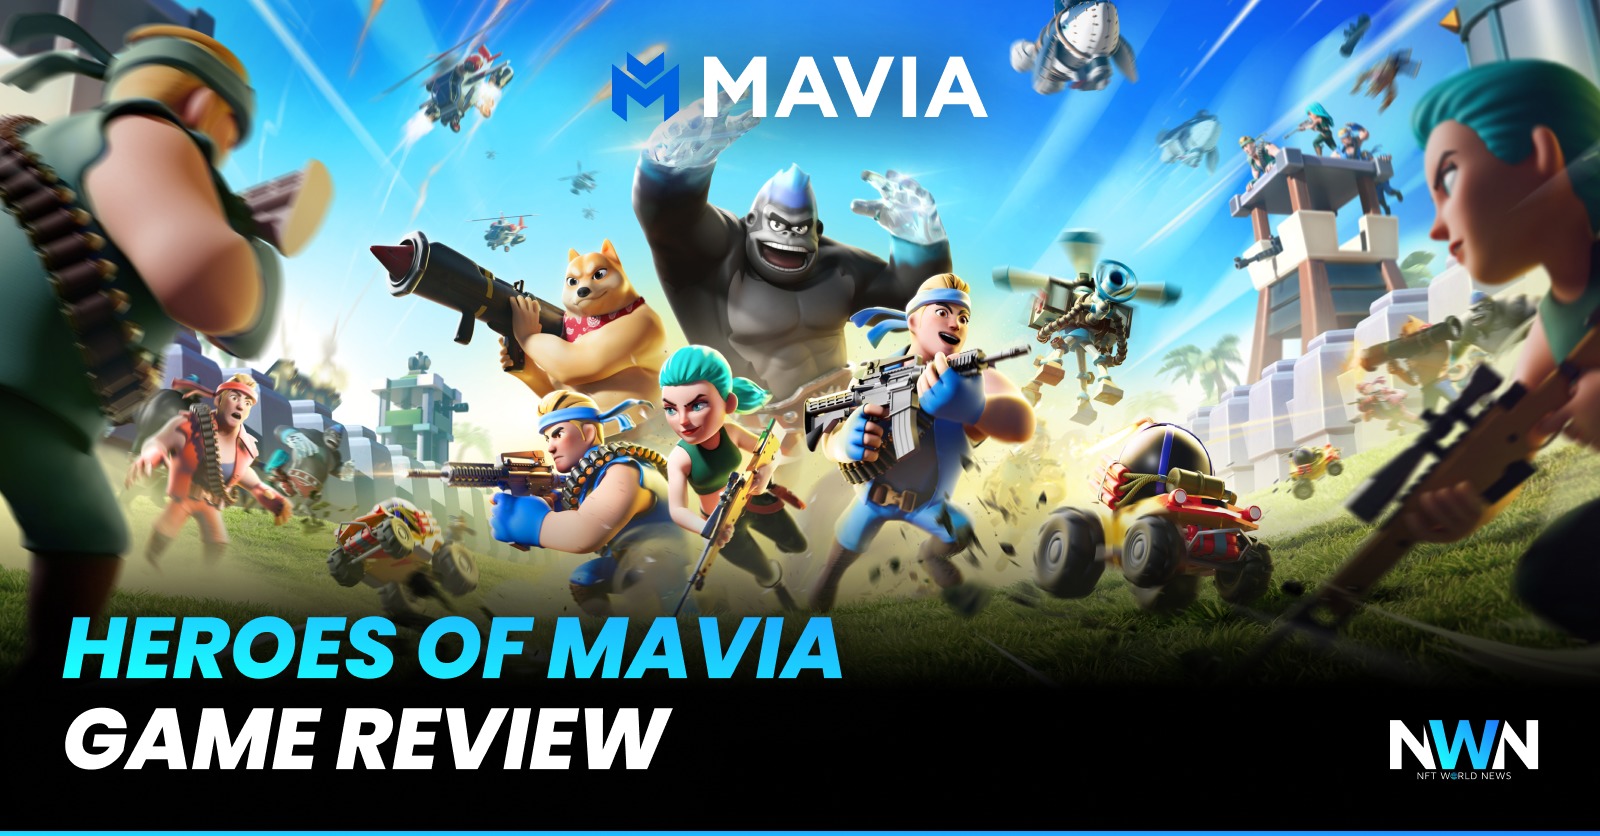 Heroes Of Mavia As The Future Of Play-To-Earn Gaming In Esports